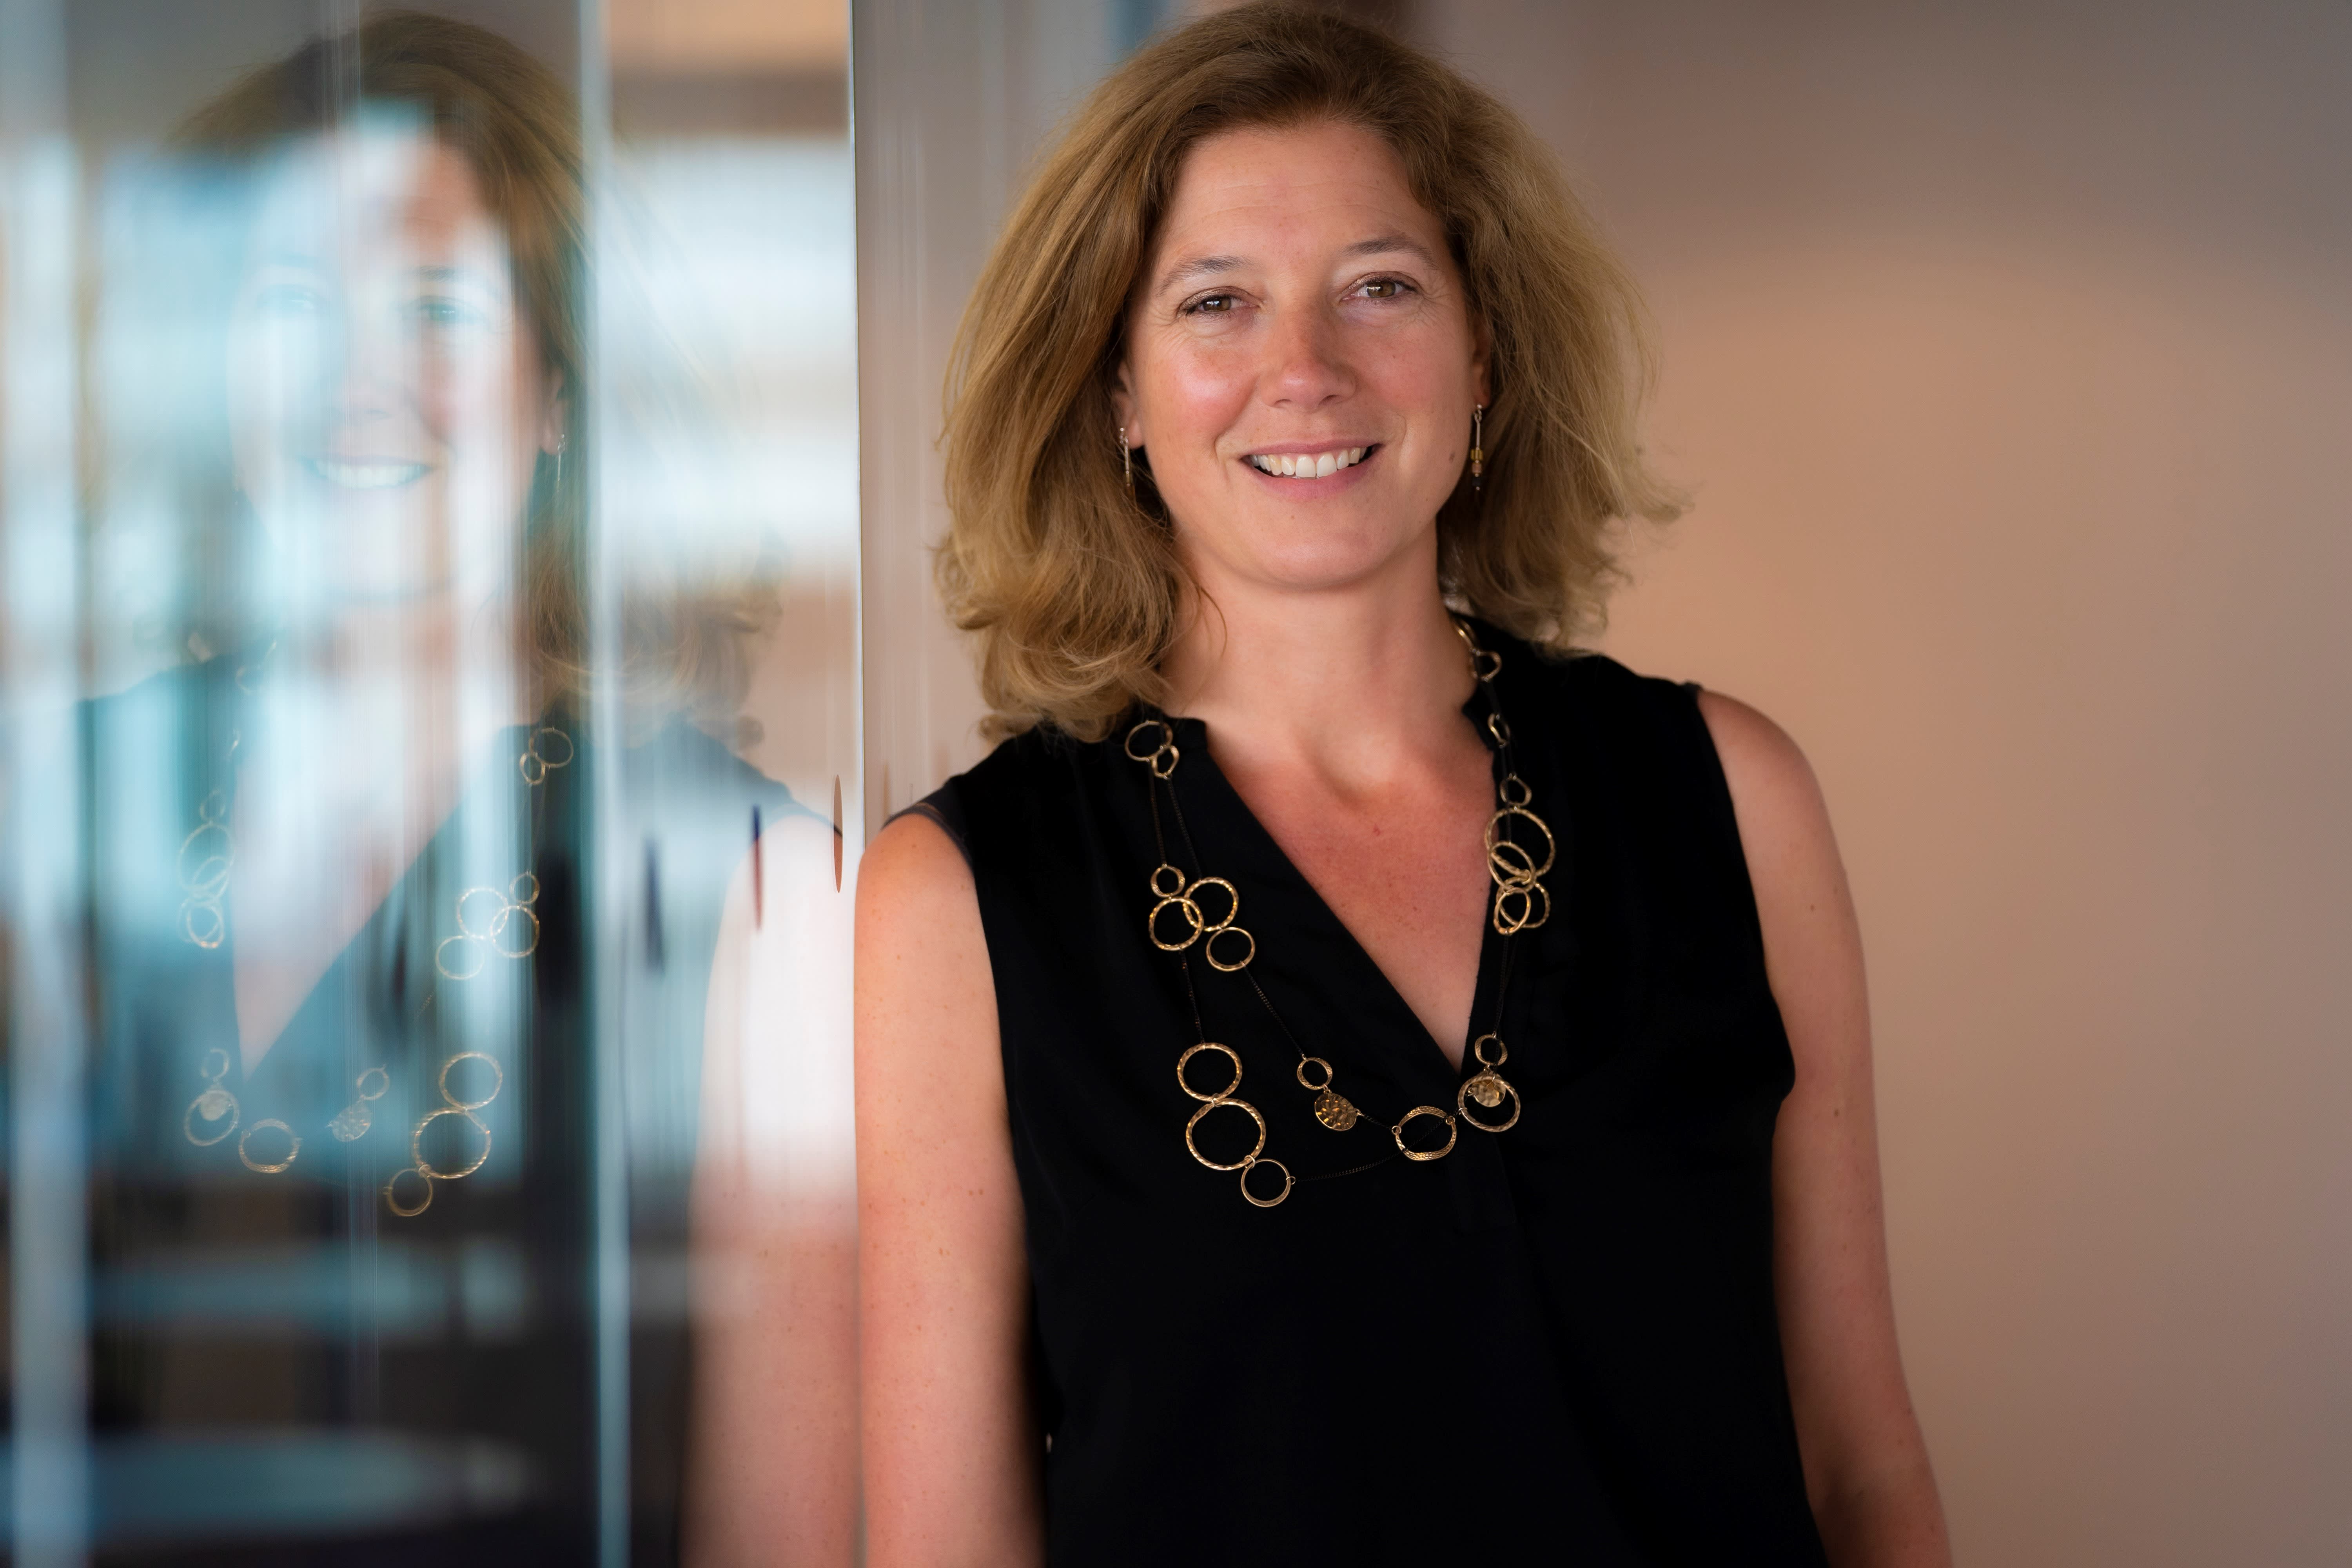 Nucleus appoints Heather Hopkins to chair advisory board